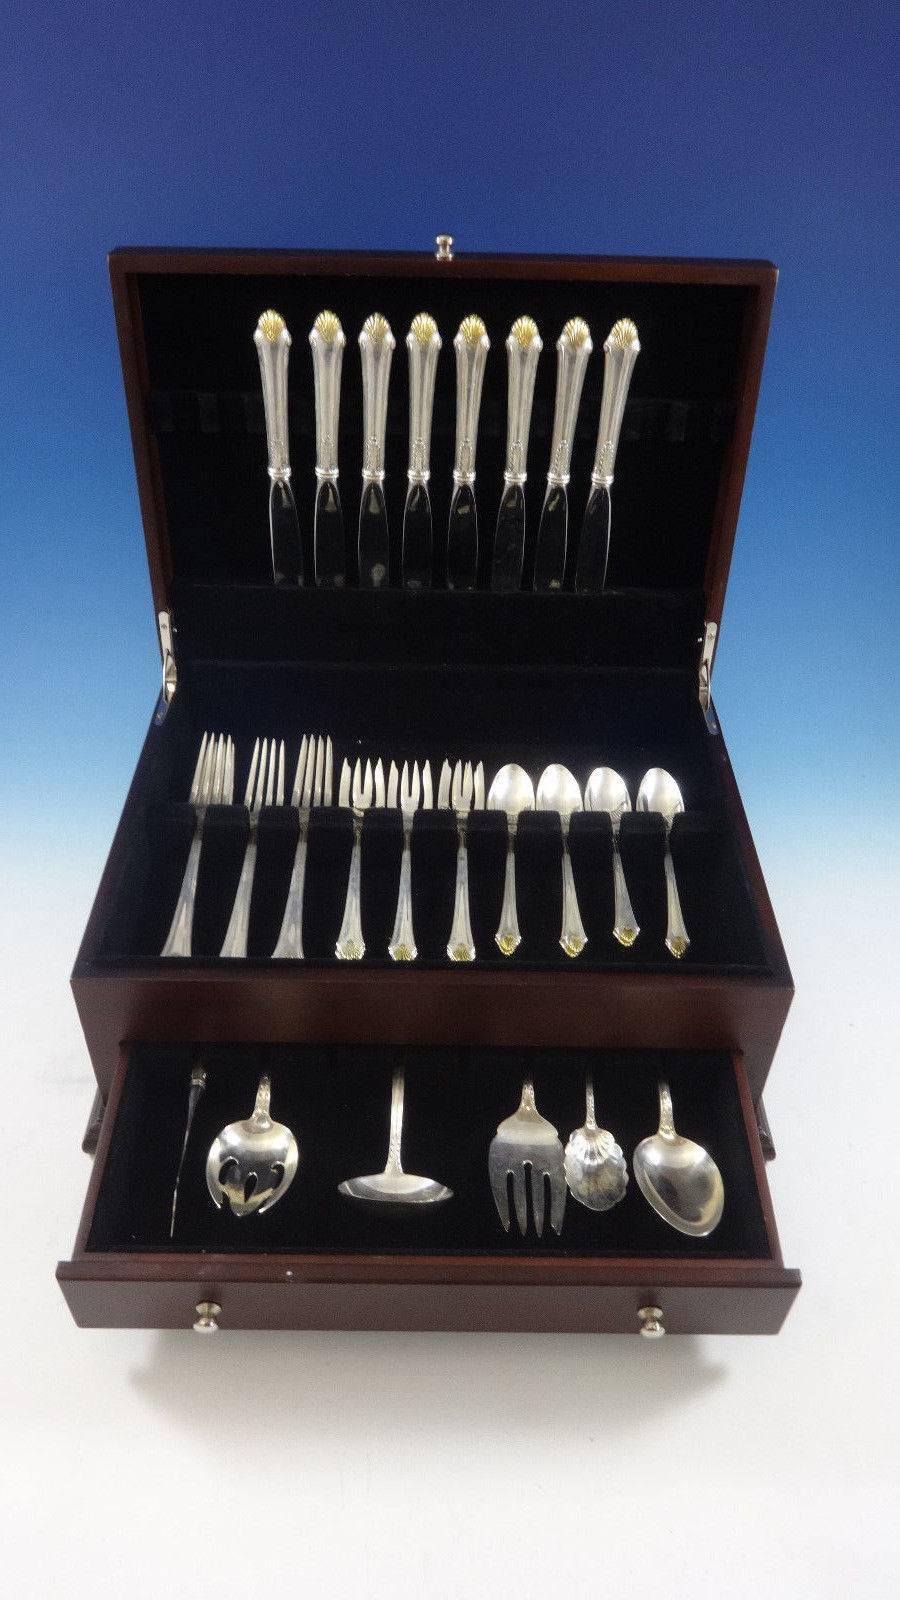 Edgemont gold by Gorham sterling silver flatware set - 38 pieces. This set includes: 

eight dinner size knives, 9 3/8